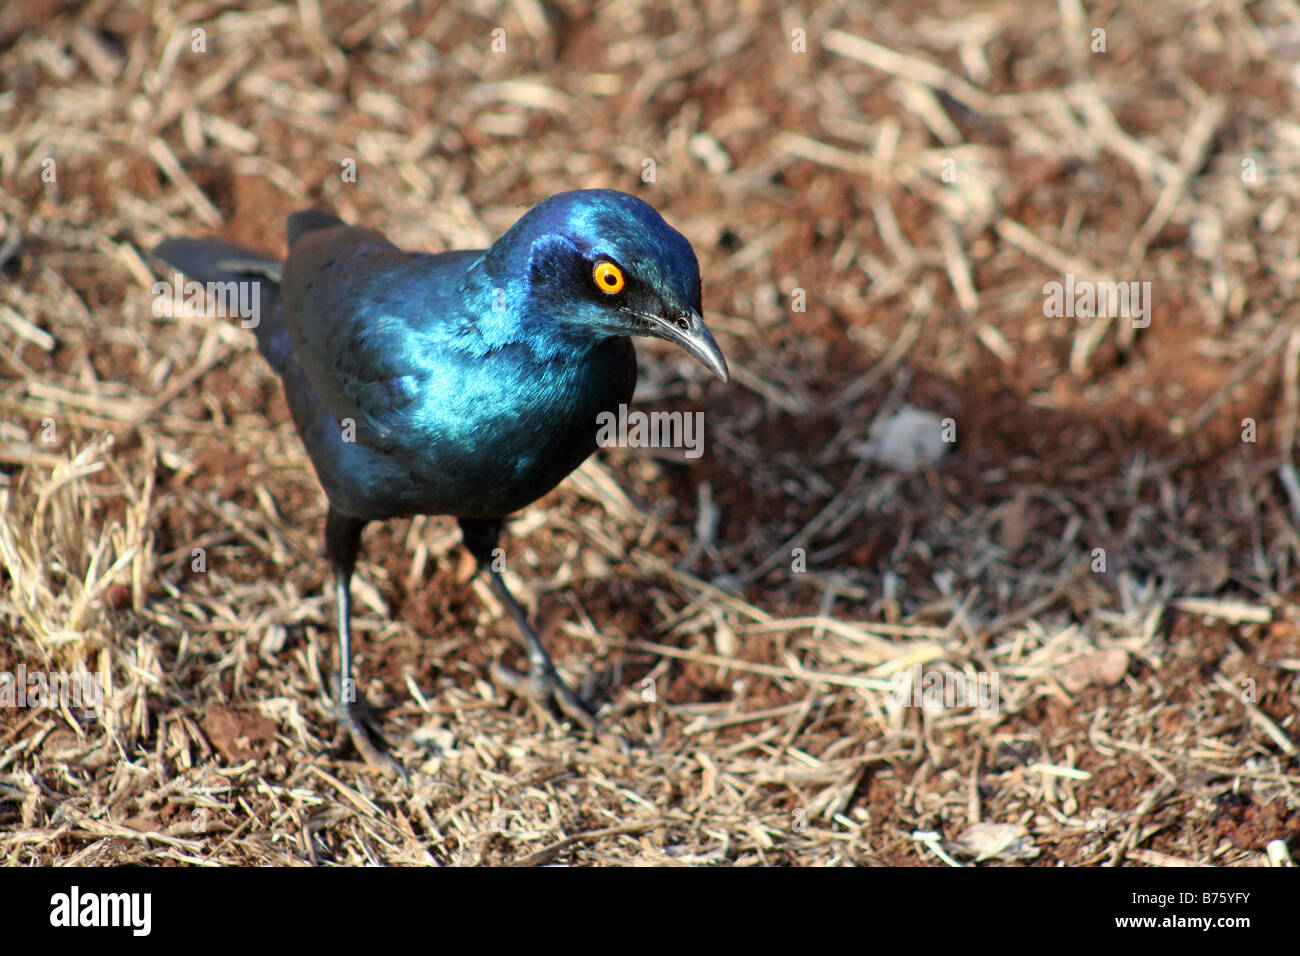 Cape glossy starling, Kruger National Park, South Africa Stock Photo